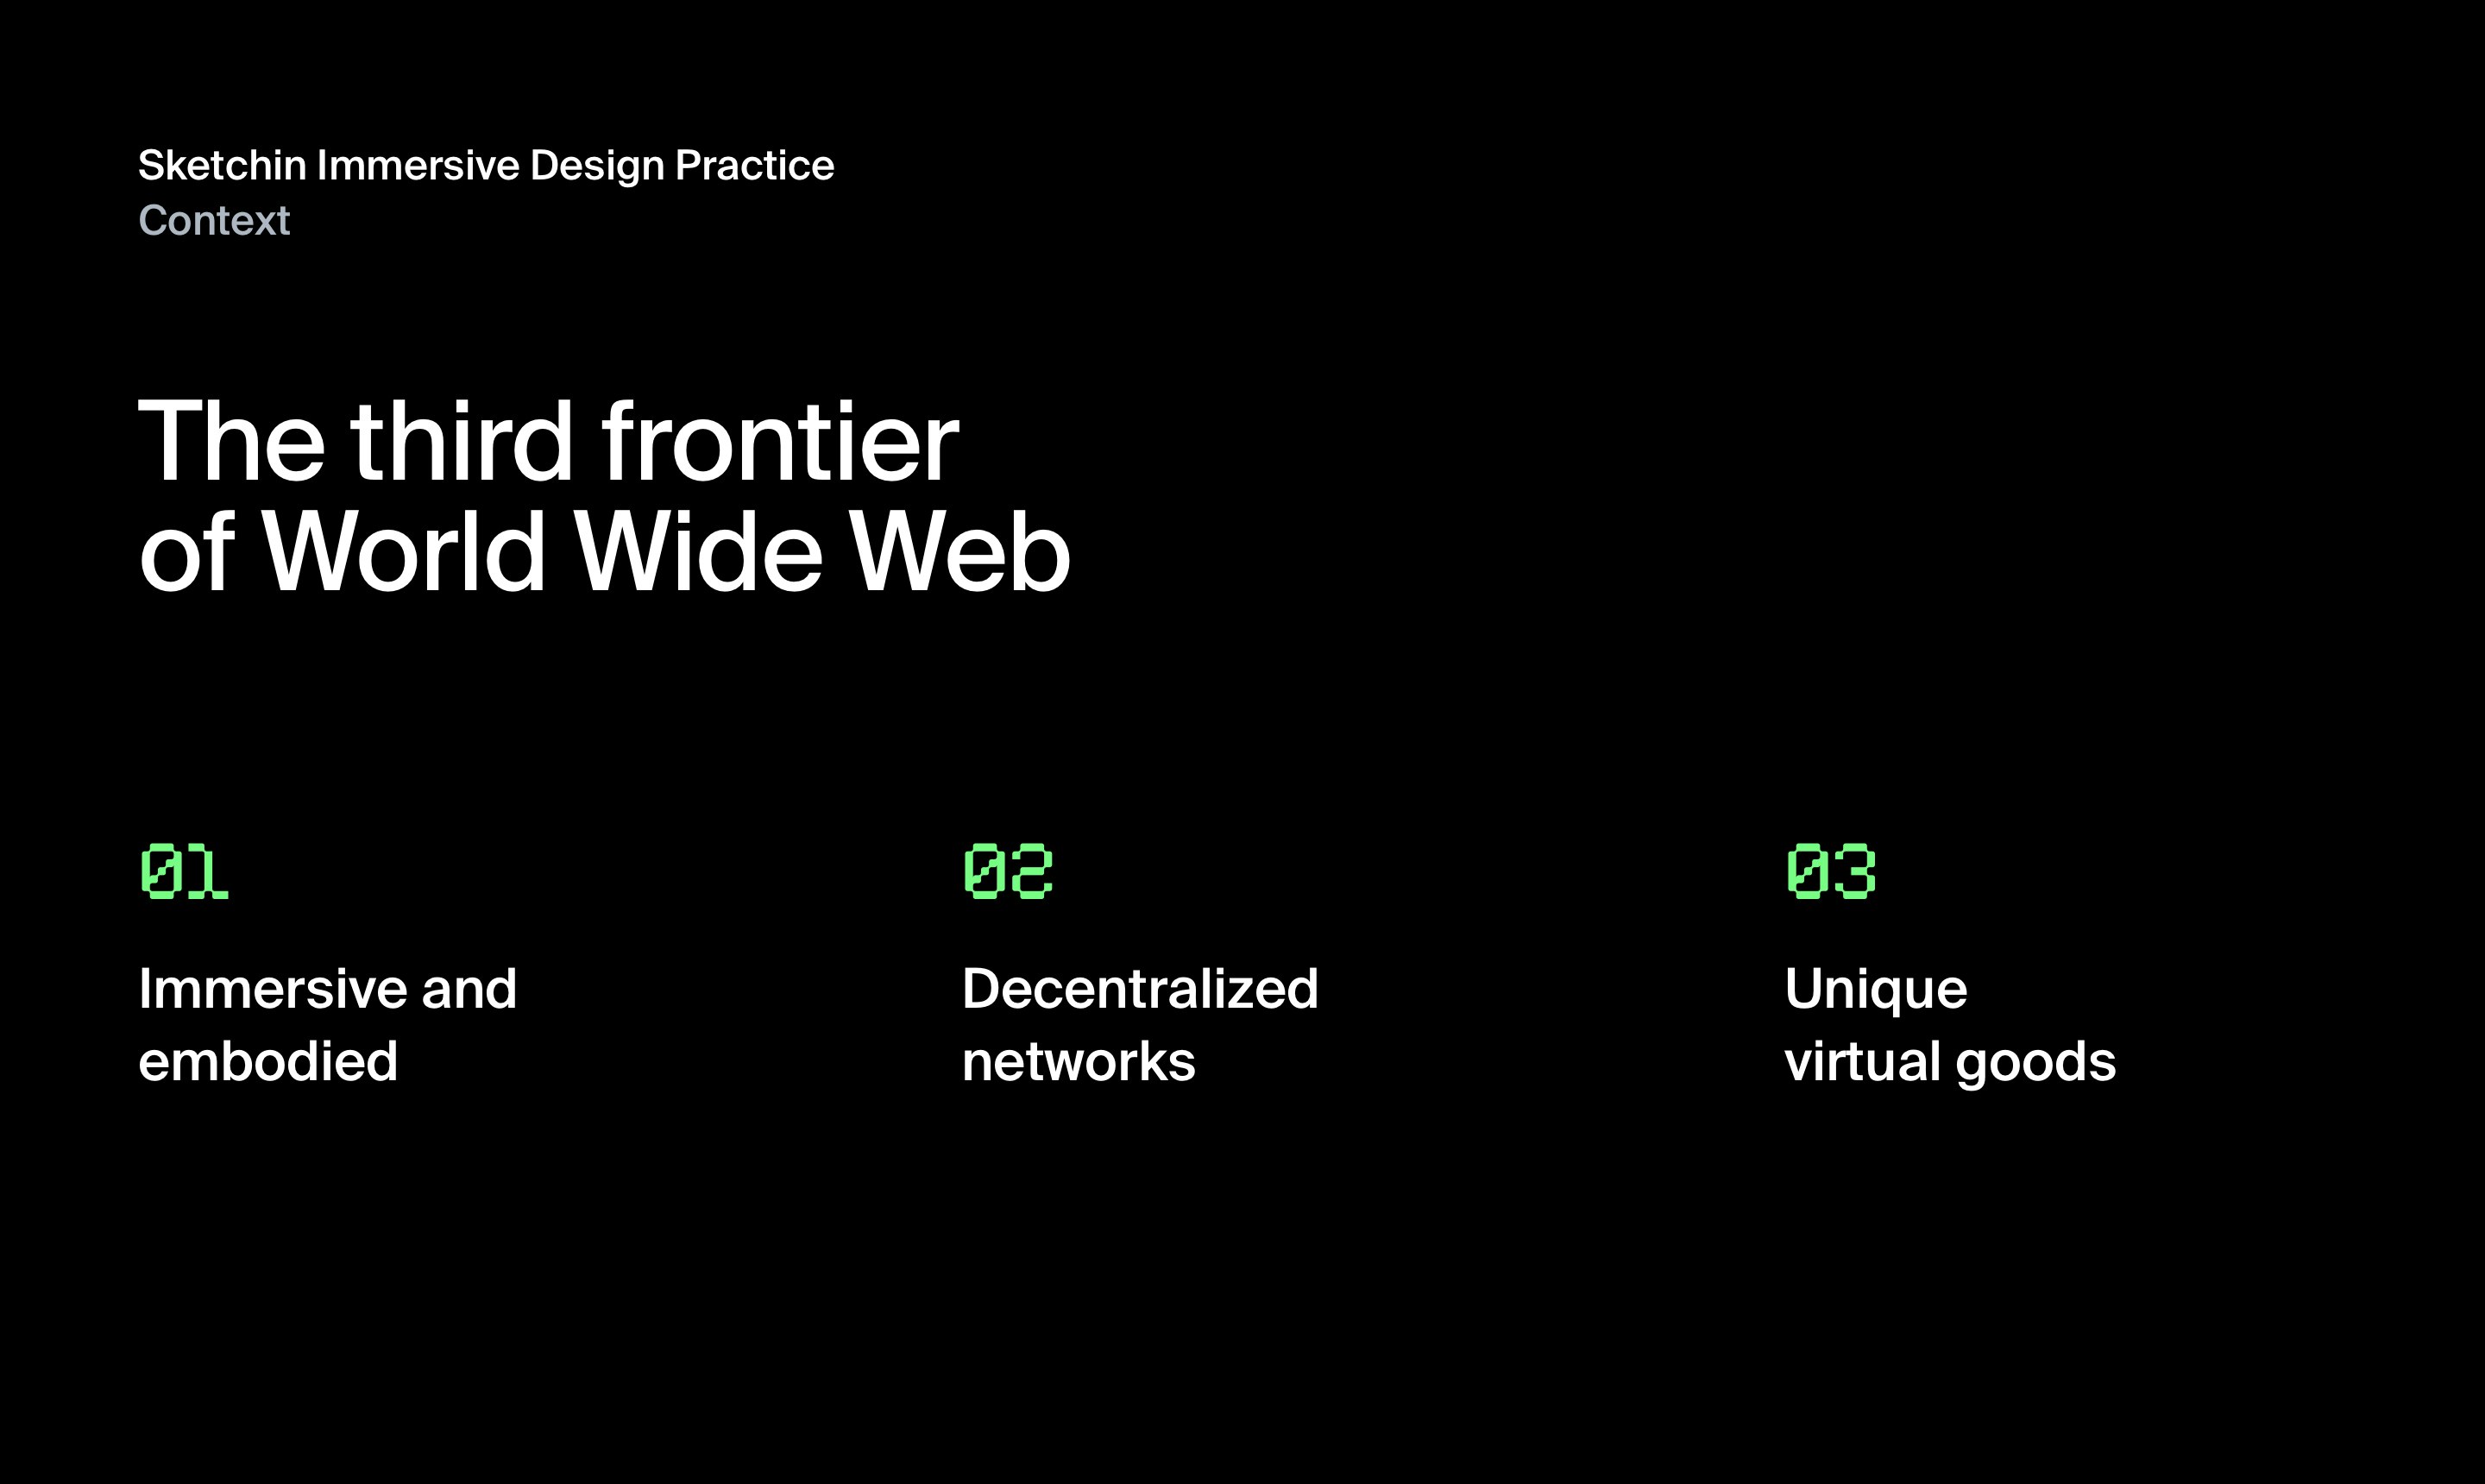 Sketchin immersive Design Practice - the third frontier of world wide web: Immersive and embodied, decentralized  networks, unique virtual goods